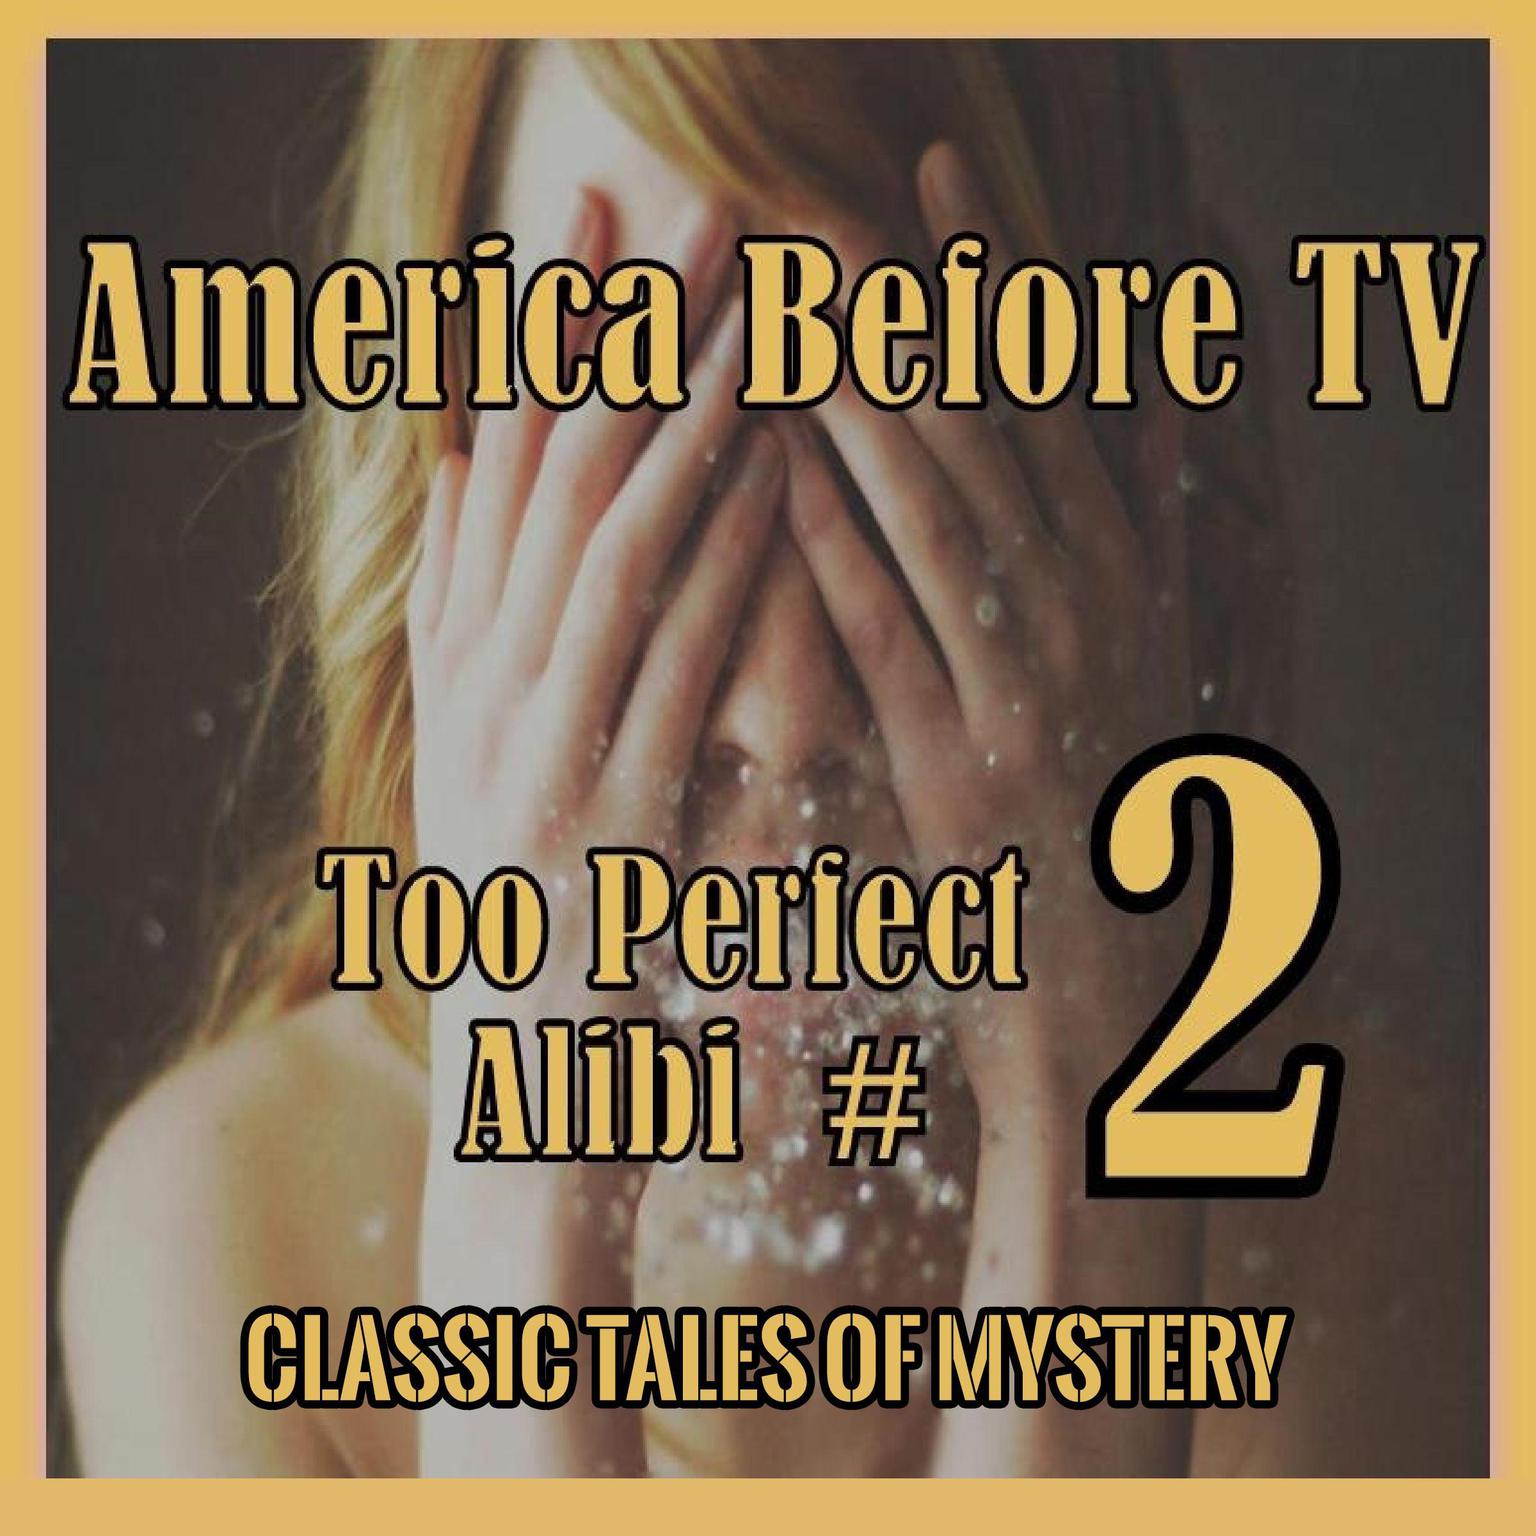 America Before TV - Too Perfect Alibi  #2 (Abridged) Audiobook, by Classic Tales of Mystery